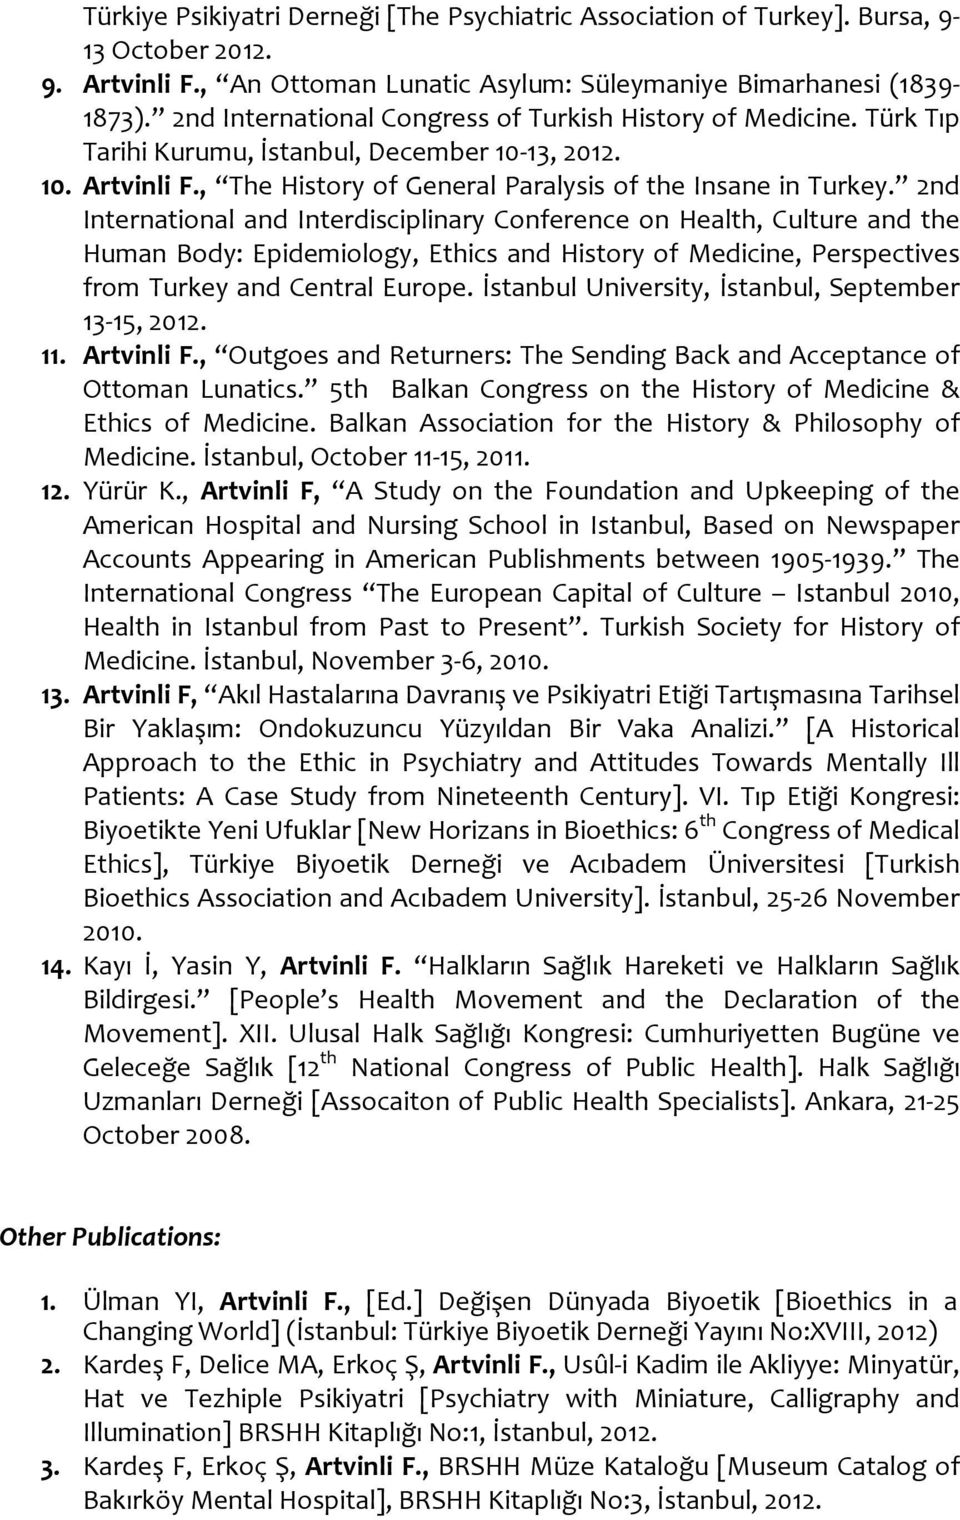 2nd International and Interdisciplinary Conference on Health, Culture and the Human Body: Epidemiology, Ethics and History of Medicine, Perspectives from Turkey and Central Europe.